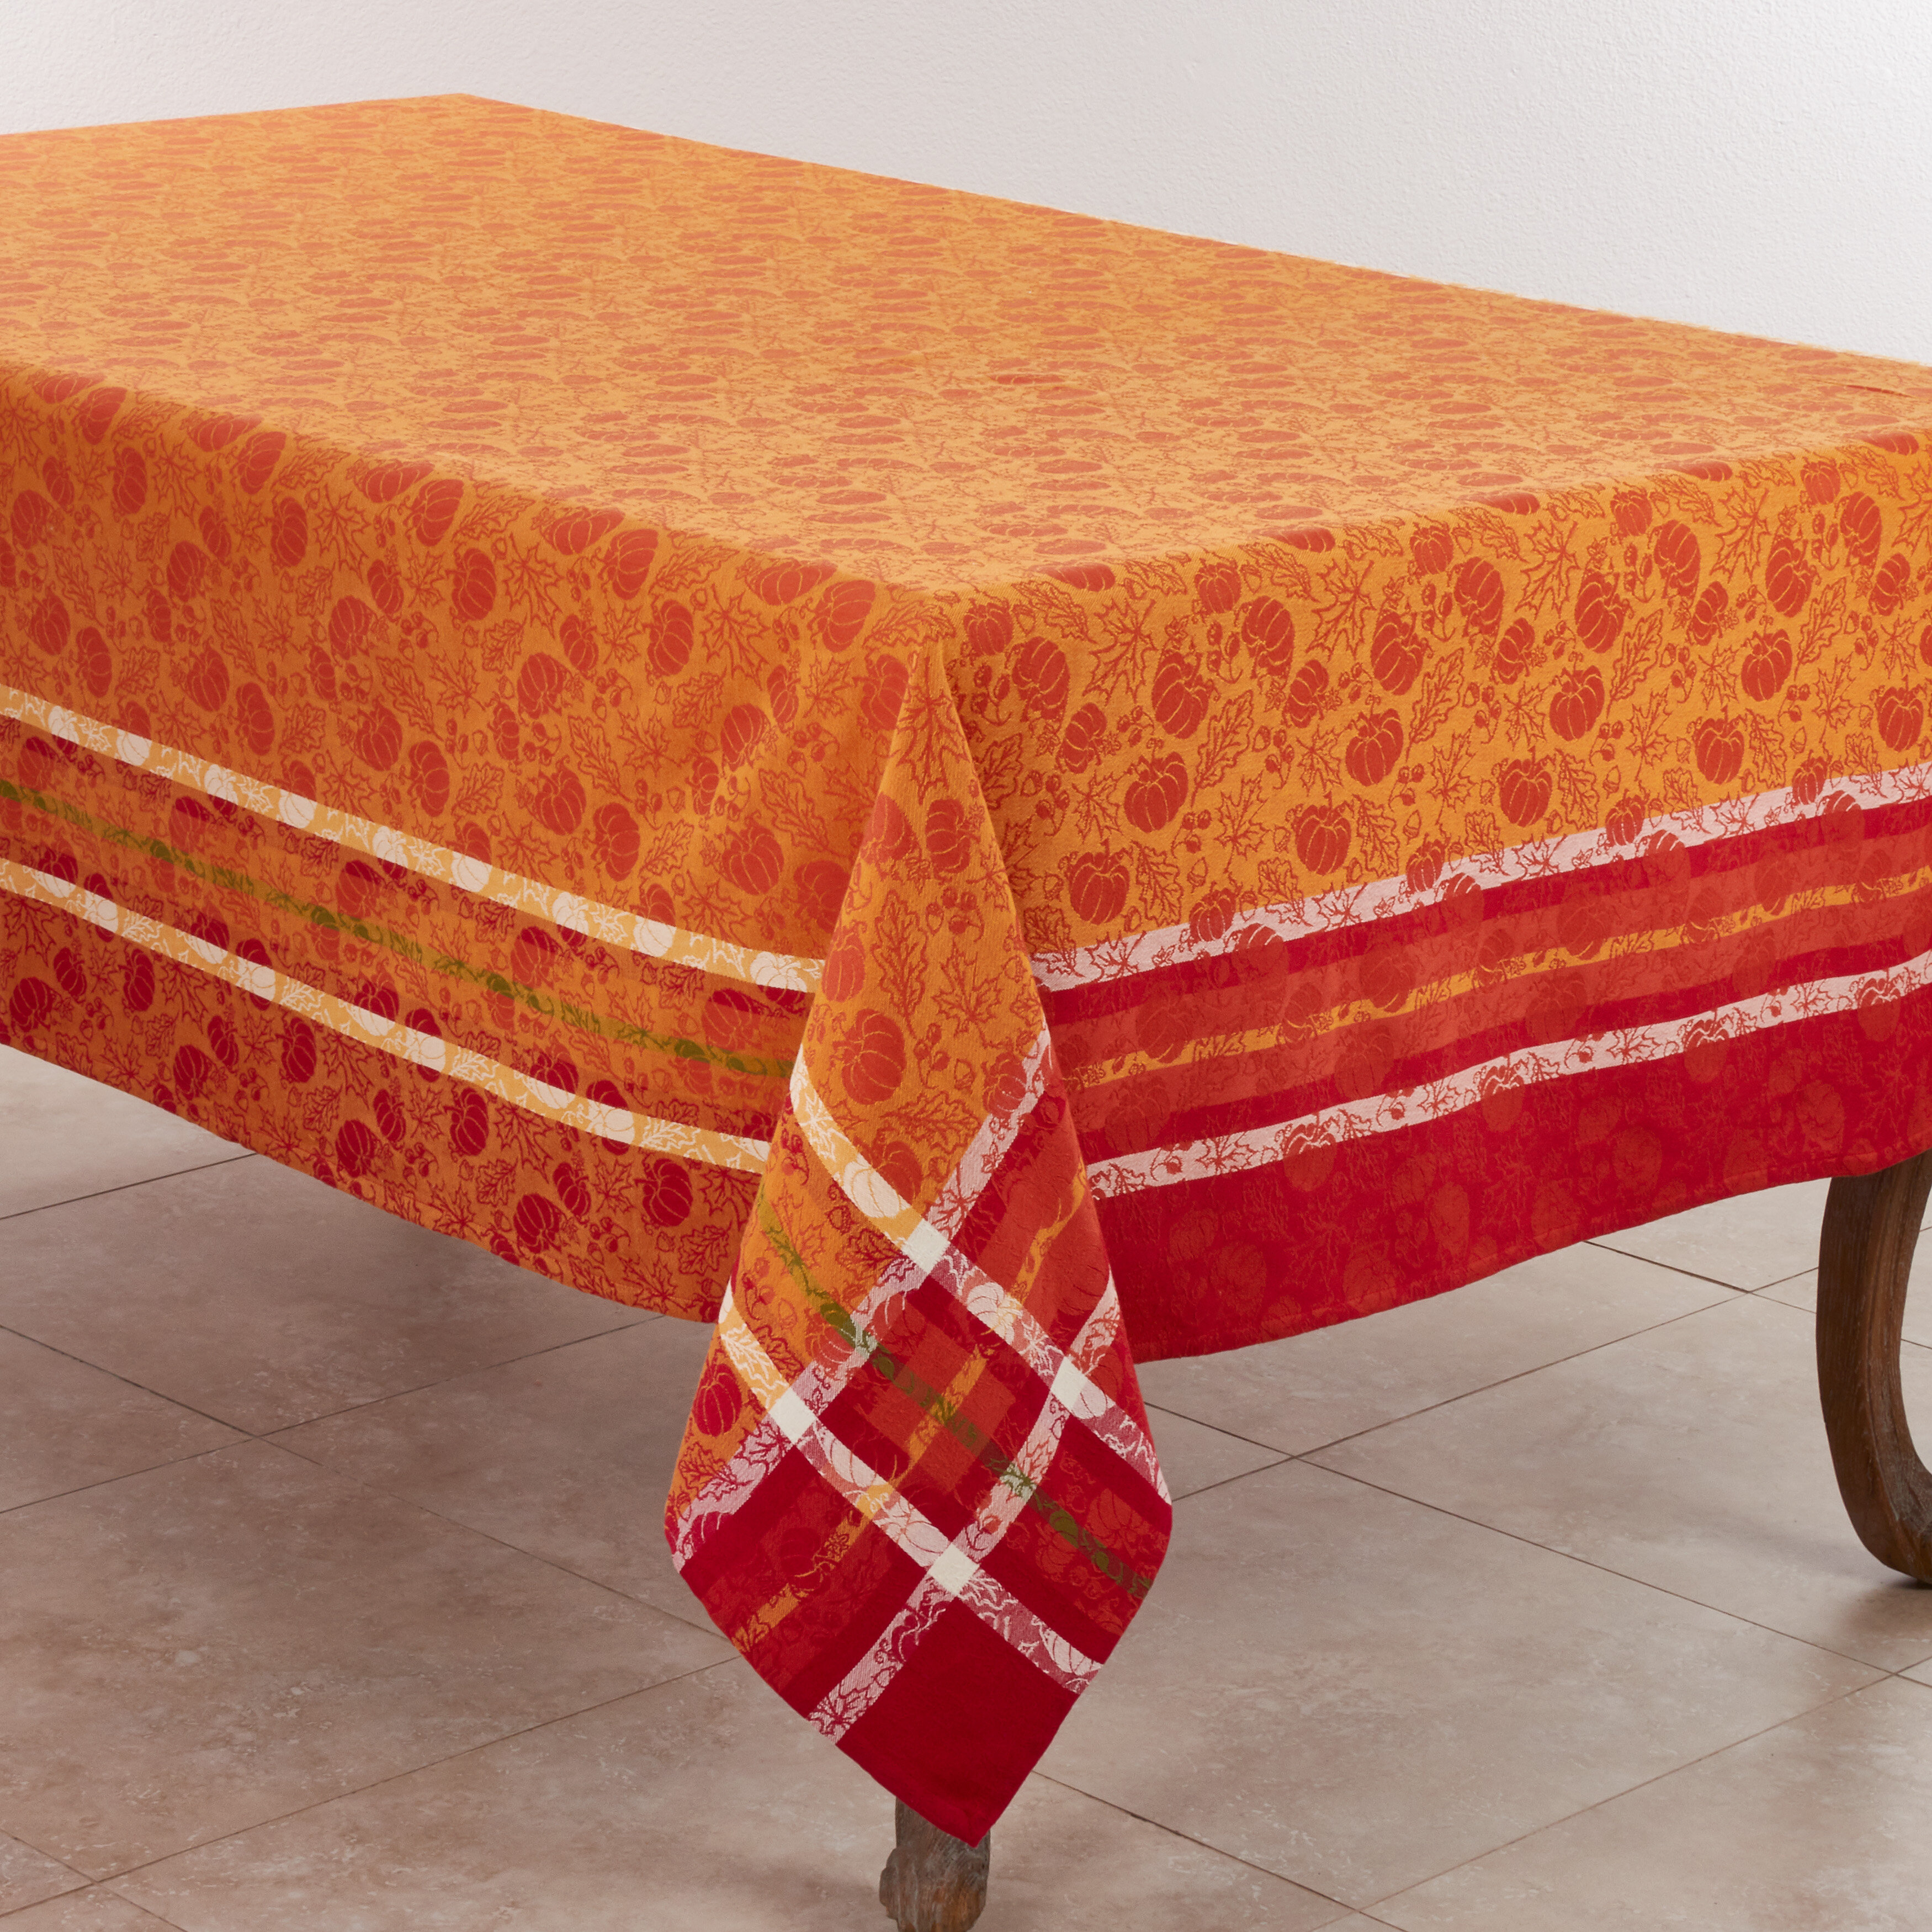 Oblong 60 X 84 in Leaf Design Fabric Fall Rust Color for sale online Harvest Season Tablecloth